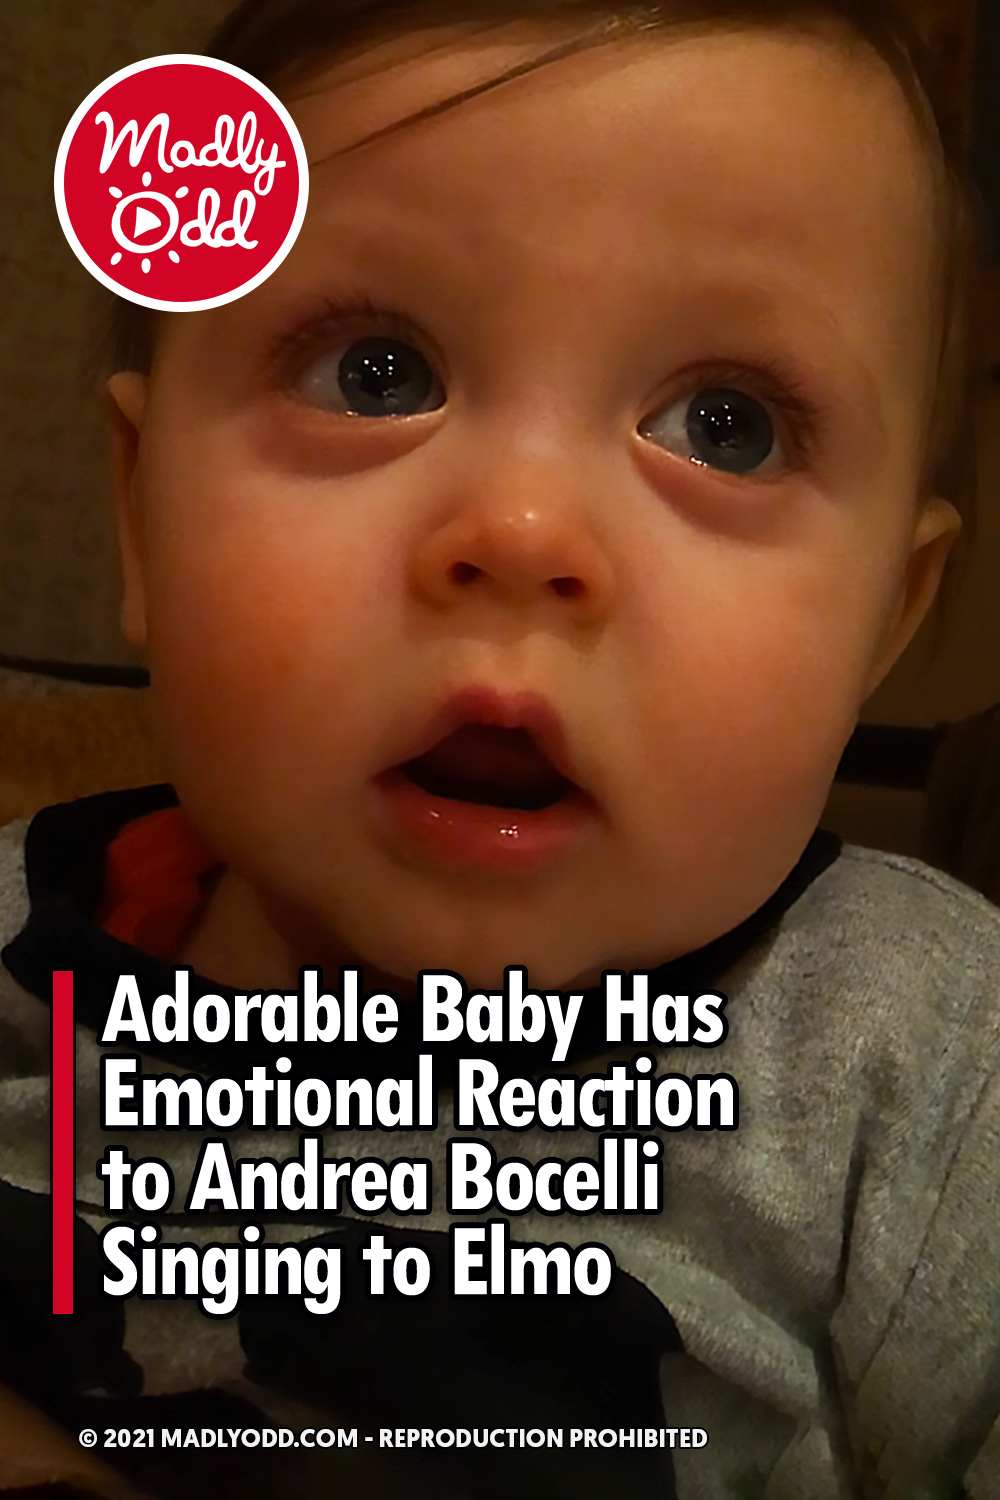 Adorable Baby Has Emotional Reaction to Andrea Bocelli Singing to Elmo